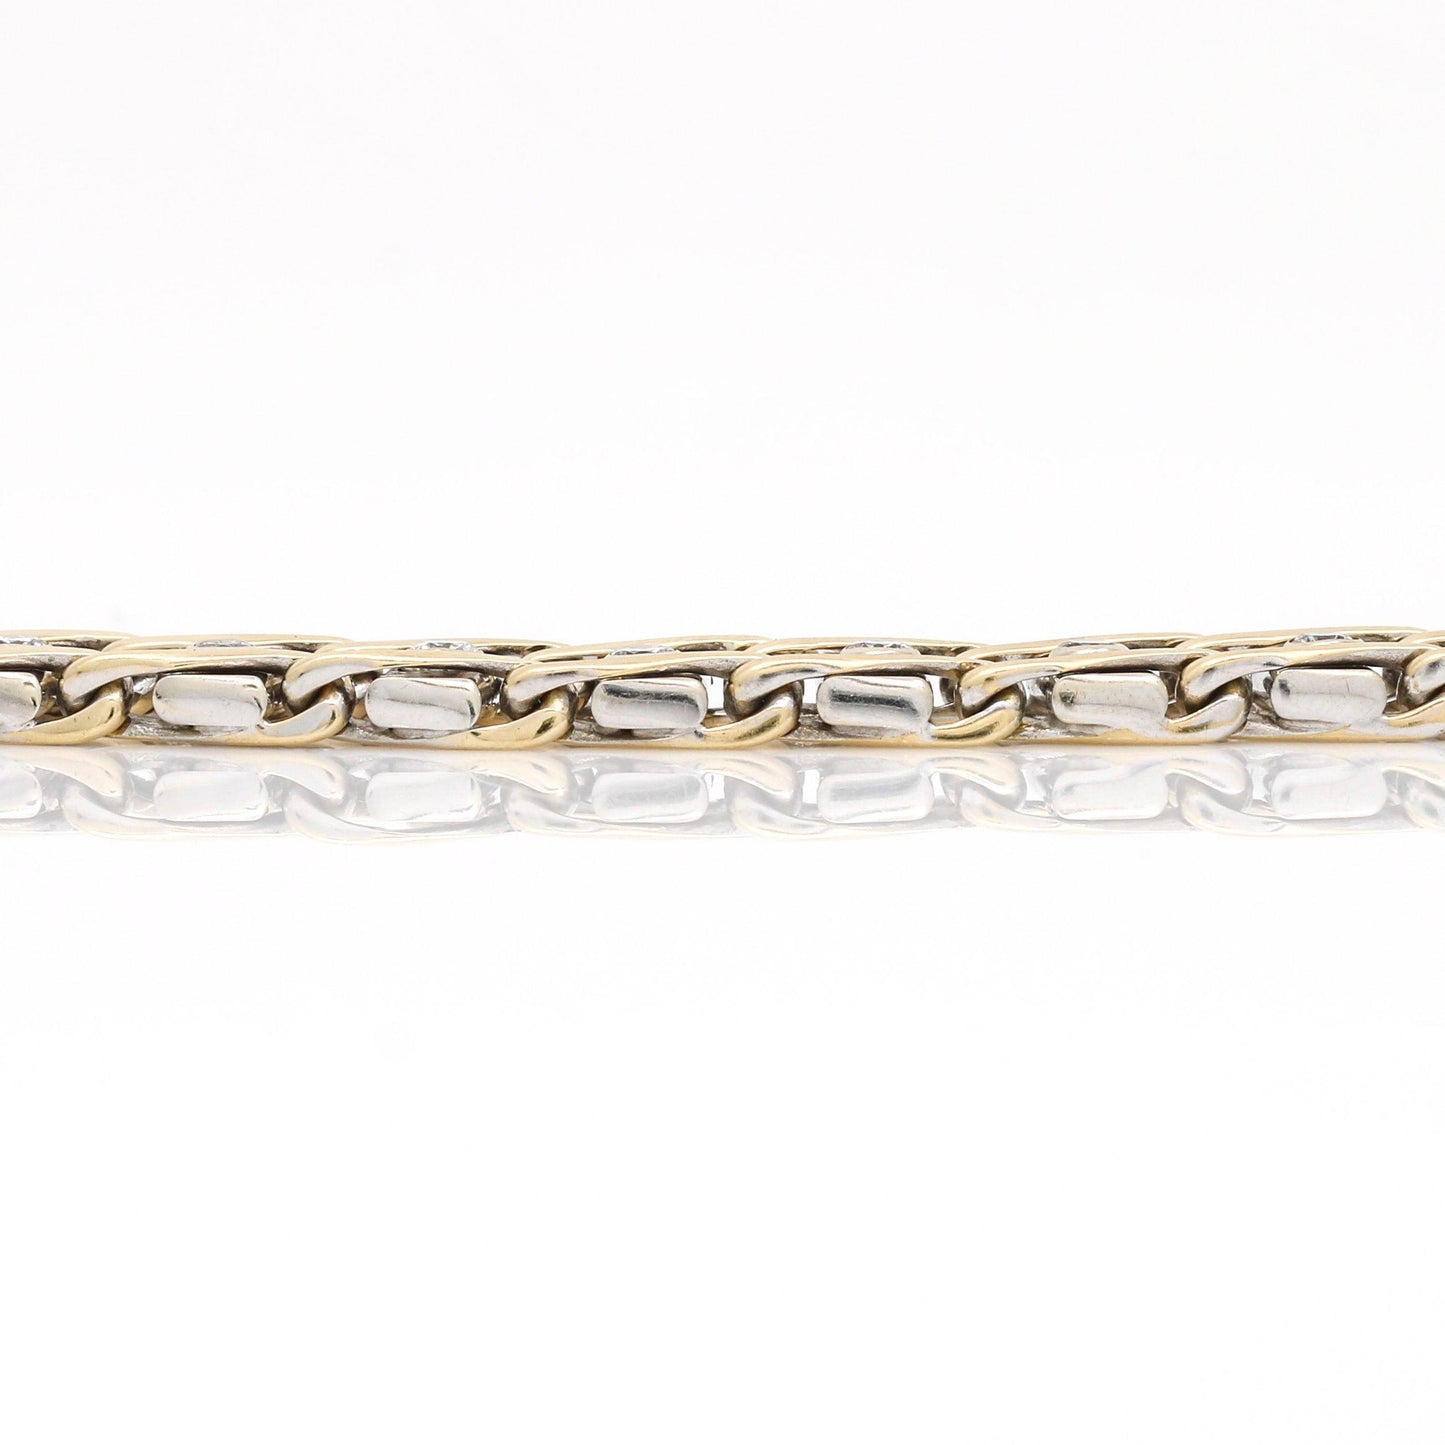 Signed Diamond Chain Link Bracelet in 14k White and Yellow Gold - 31 Jewels Inc.